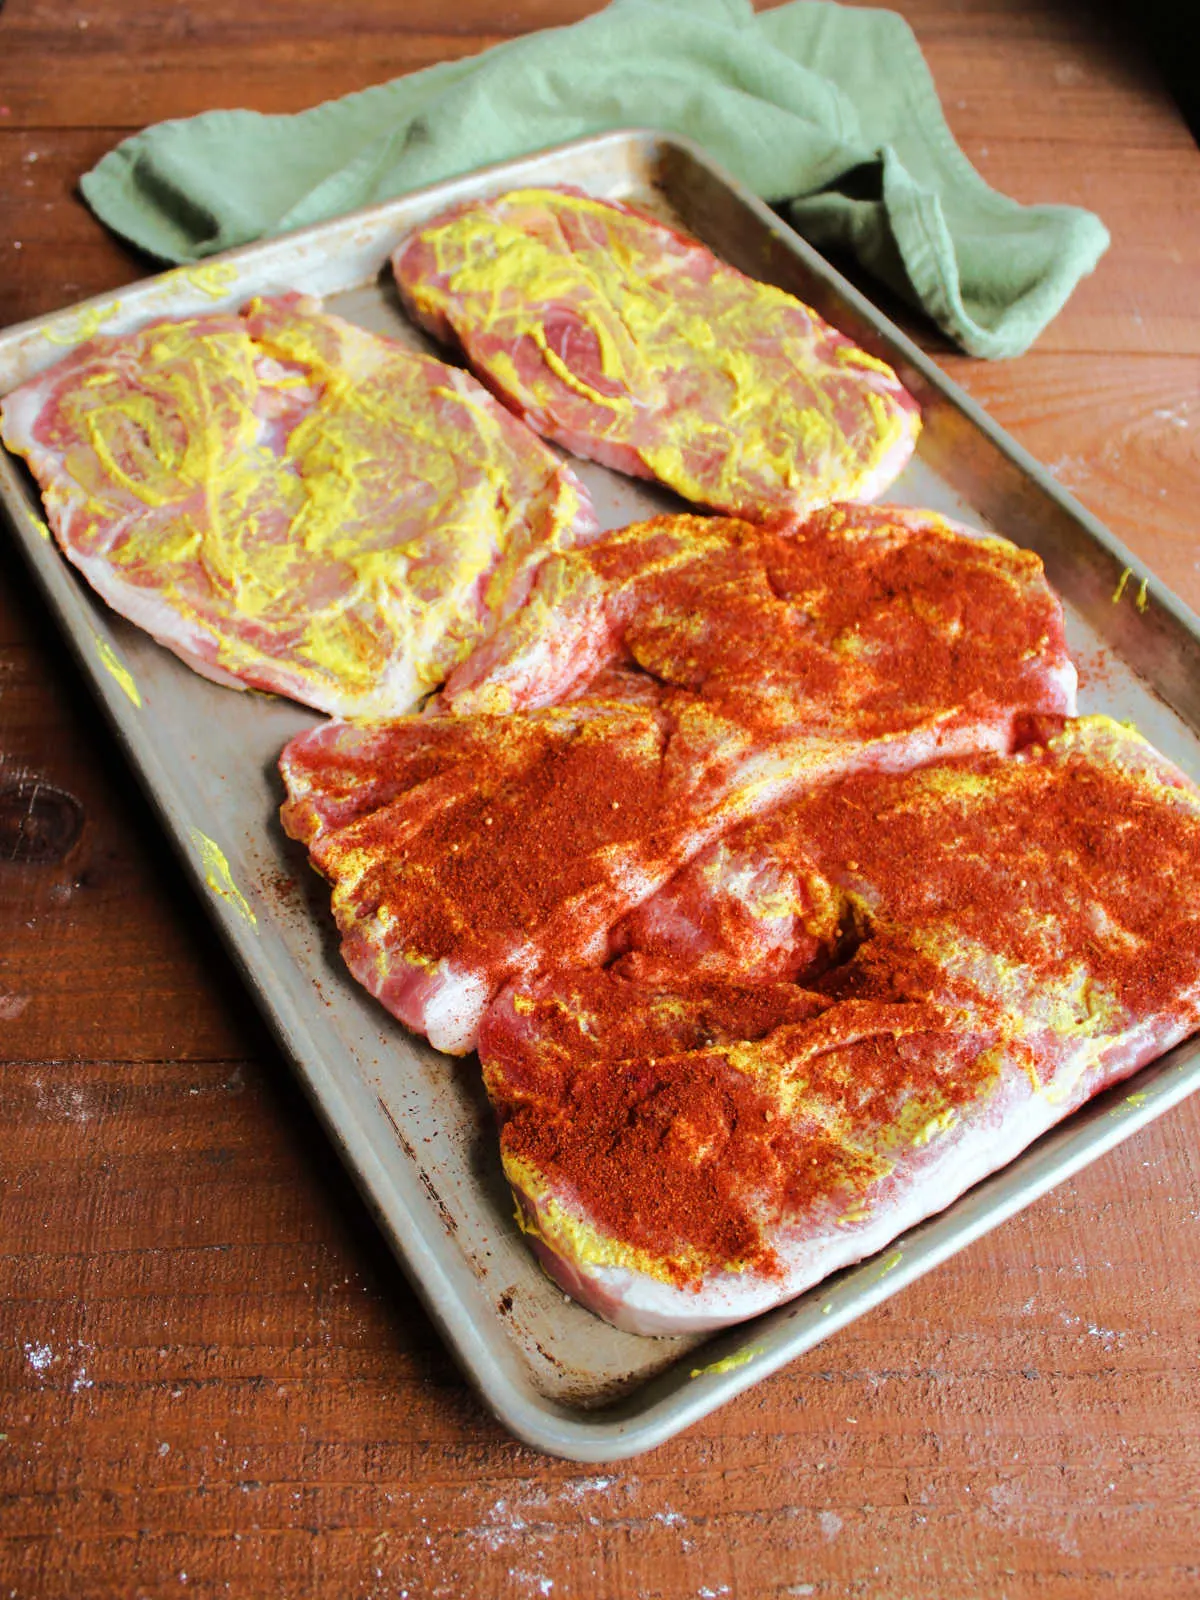 Pan of pork steaks coated in yellow mustard, two that have bbq rub on them and two that still need the rub applied.